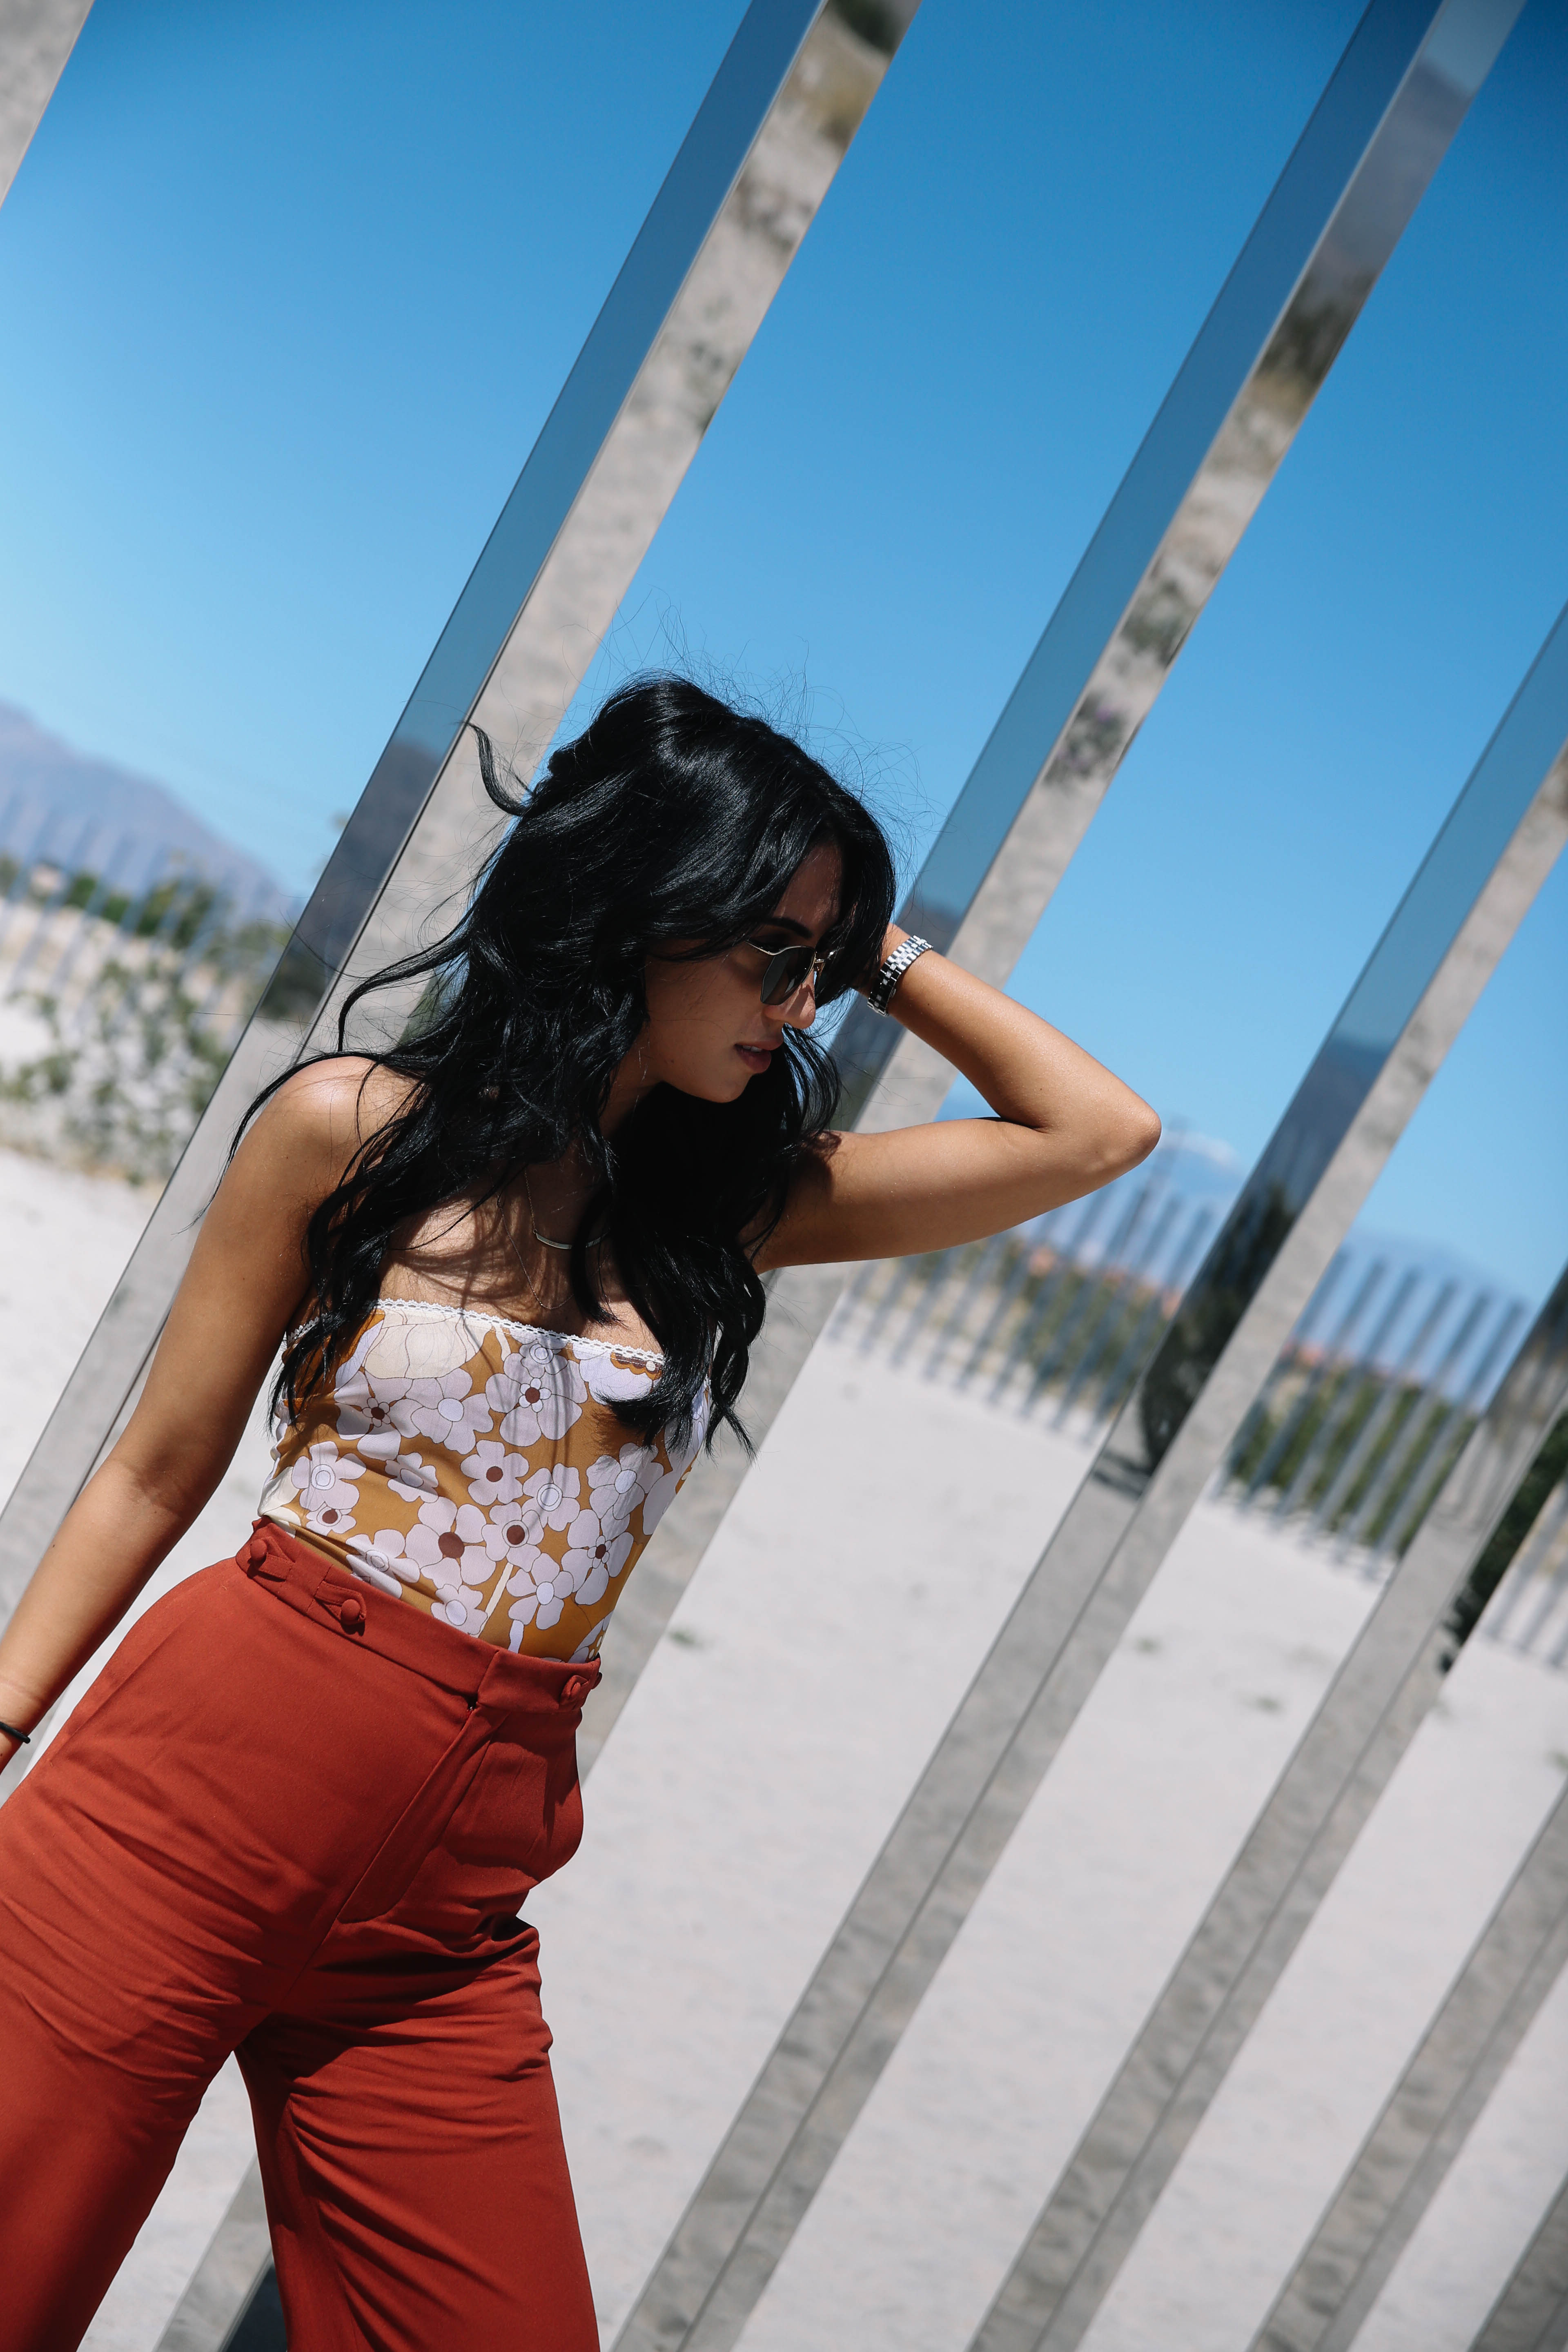 LA Blogger Tania Sarin on coachella weekend featuring festival style with chloe strapless floral body suit at palm desert mirror exhibit